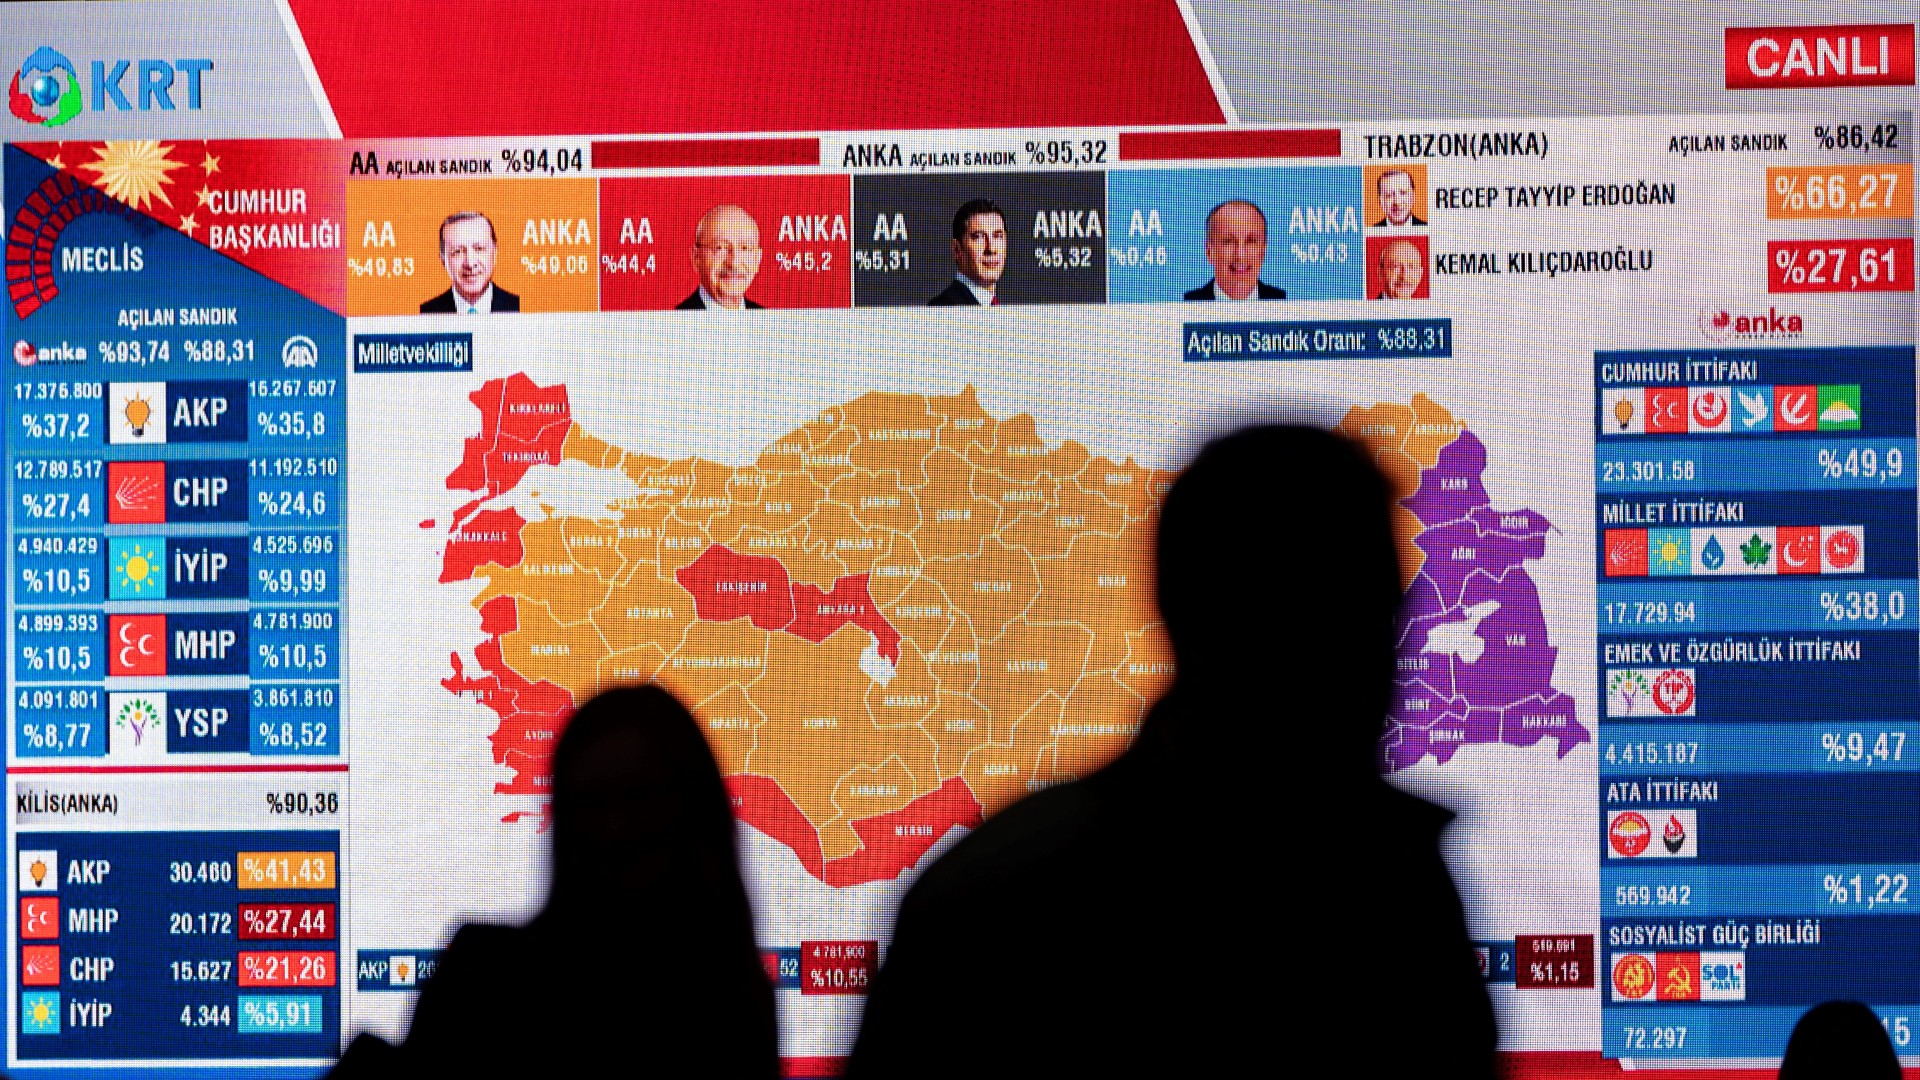 CHP members watch TV after the first results at the CHP building in Istanbul (AFP)